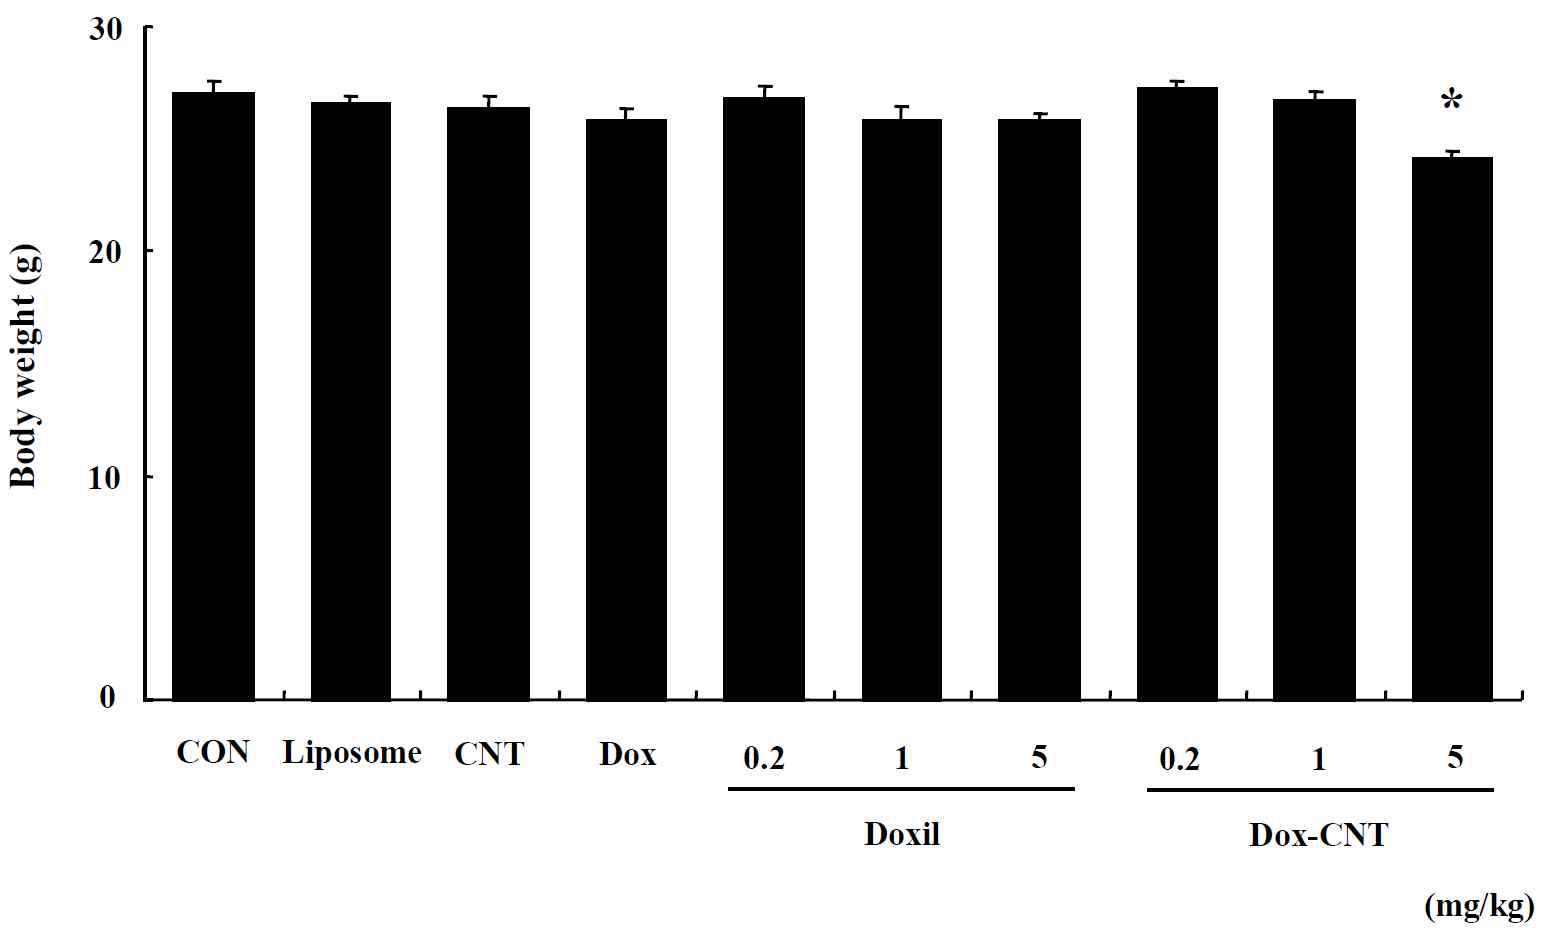 Body weight in male ICR mice for 14 days after single exposure. Mice were respectively administered by intravenous injection with liposome, CNT, Dox, Doxil (0.2, 1, 5 mg/kg) and Dox-CNT (0.2, 1, 5 mg/kg). The results are presented as mean ± SE (n = 10). * p < 0.05, significantly different from the control.